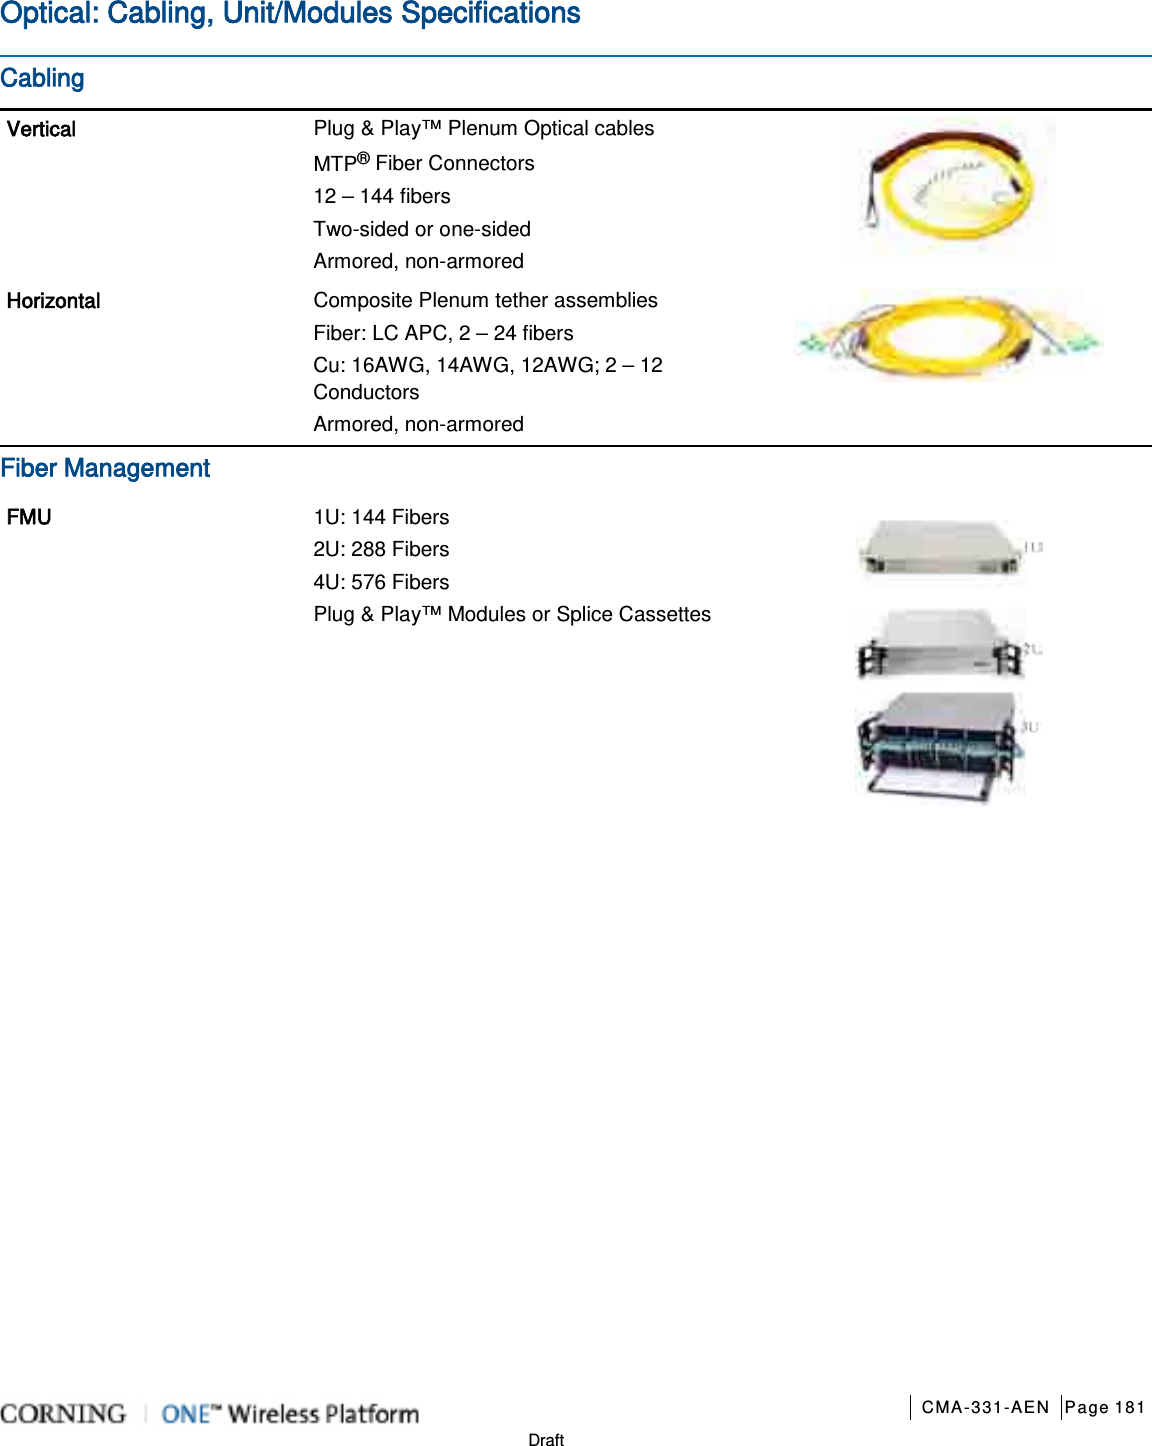       CMA-331-AEN Page 181  Draft Optical: Cabling, Unit/Modules Specifications Cabling Vertical Plug &amp; Play™ Plenum Optical cables MTP® Fiber Connectors 12 – 144 fibers Two-sided or one-sided   Armored, non-armored  Horizontal Composite Plenum tether assemblies Fiber: LC APC, 2 – 24 fibers   Cu: 16AWG, 14AWG, 12AWG; 2 – 12 Conductors Armored, non-armored  Fiber Management FMU 1U: 144 Fibers 2U: 288 Fibers   4U: 576 Fibers Plug &amp; Play™ Modules or Splice Cassettes  